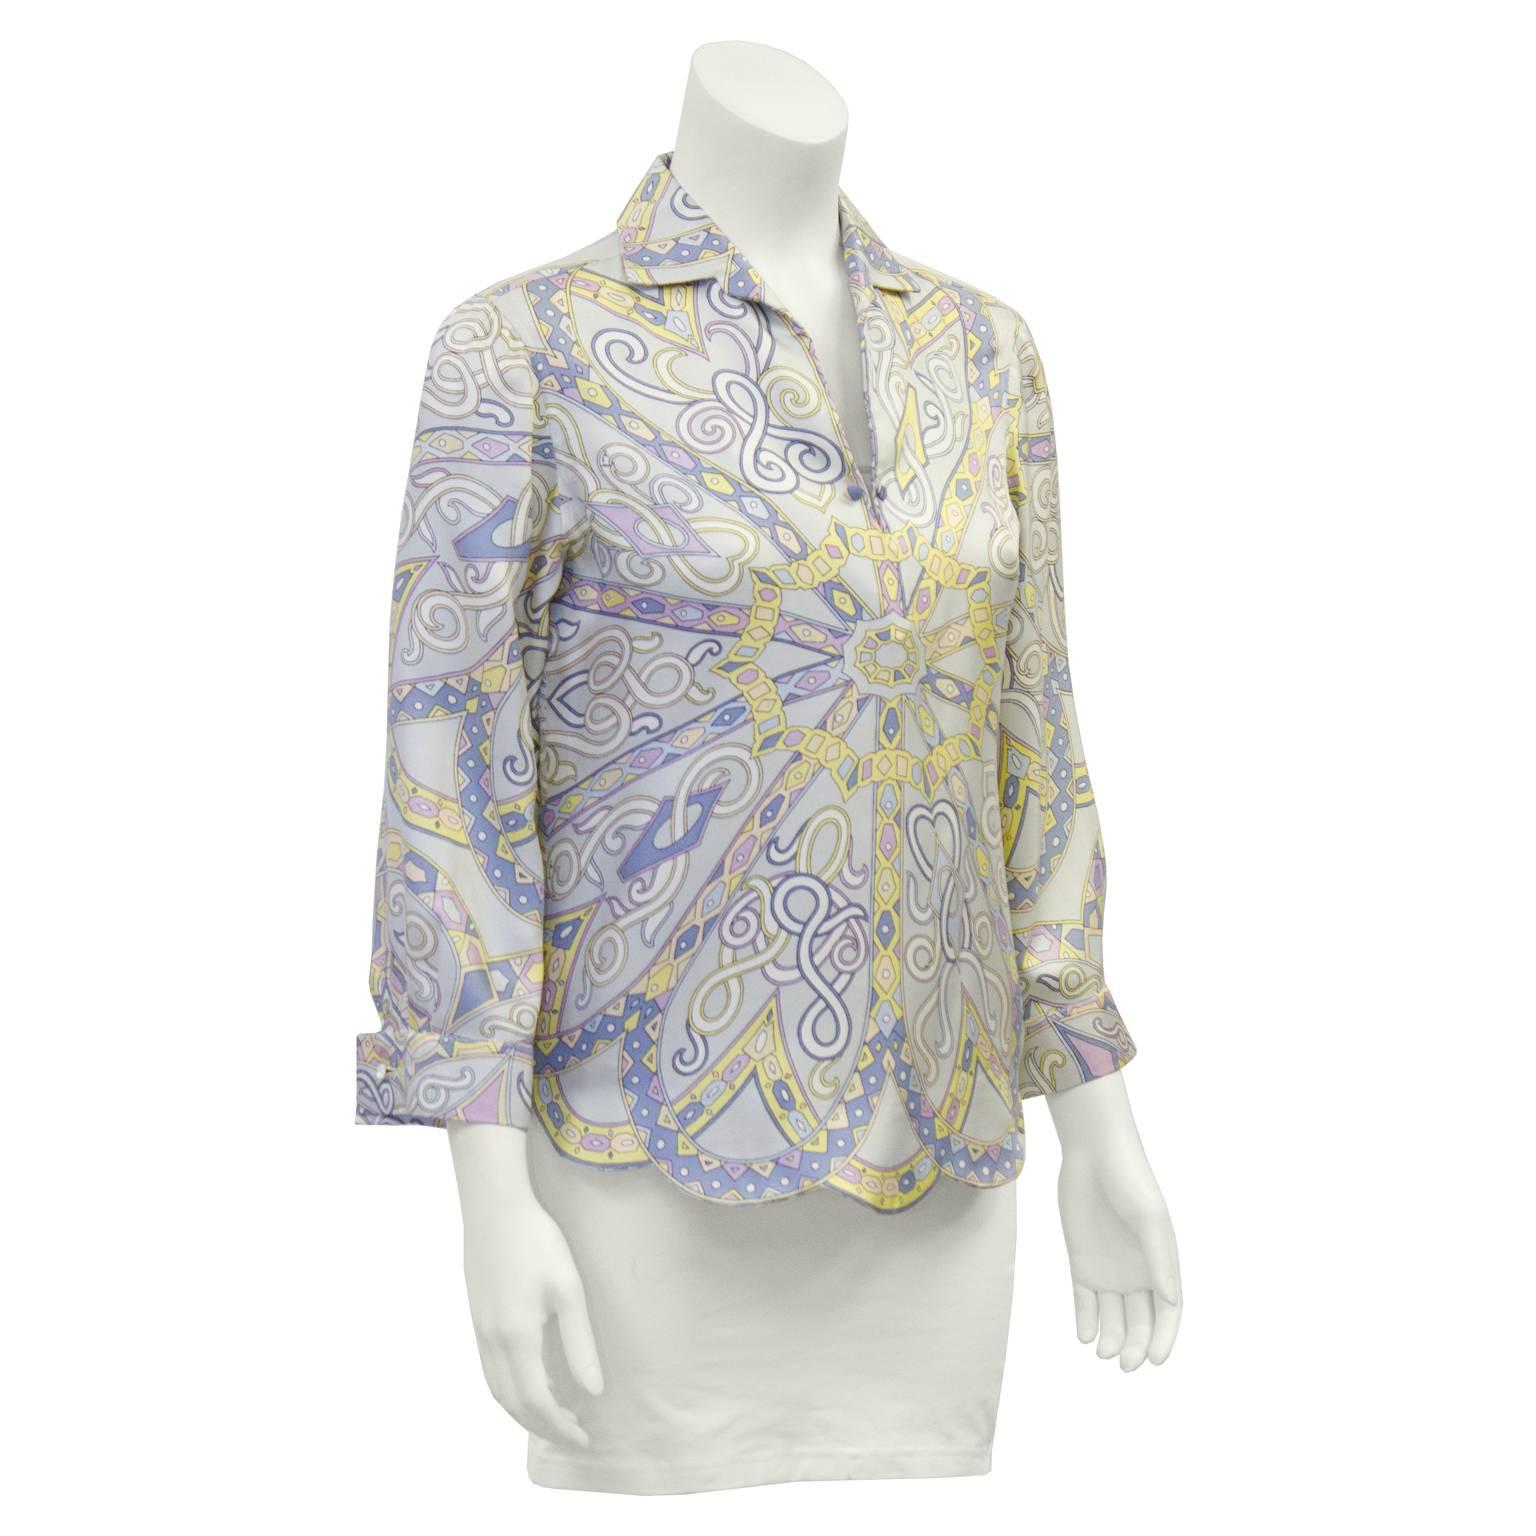 Gorgeous Emilio Pucci multi colored silk blouse from the 1970's, featuring a fabulous detailed print in light pastel blue, pink, yellow and purple. Shirt collar with a plunging V neckline. Cuffs have single button on them. Scalloped hemline adds a